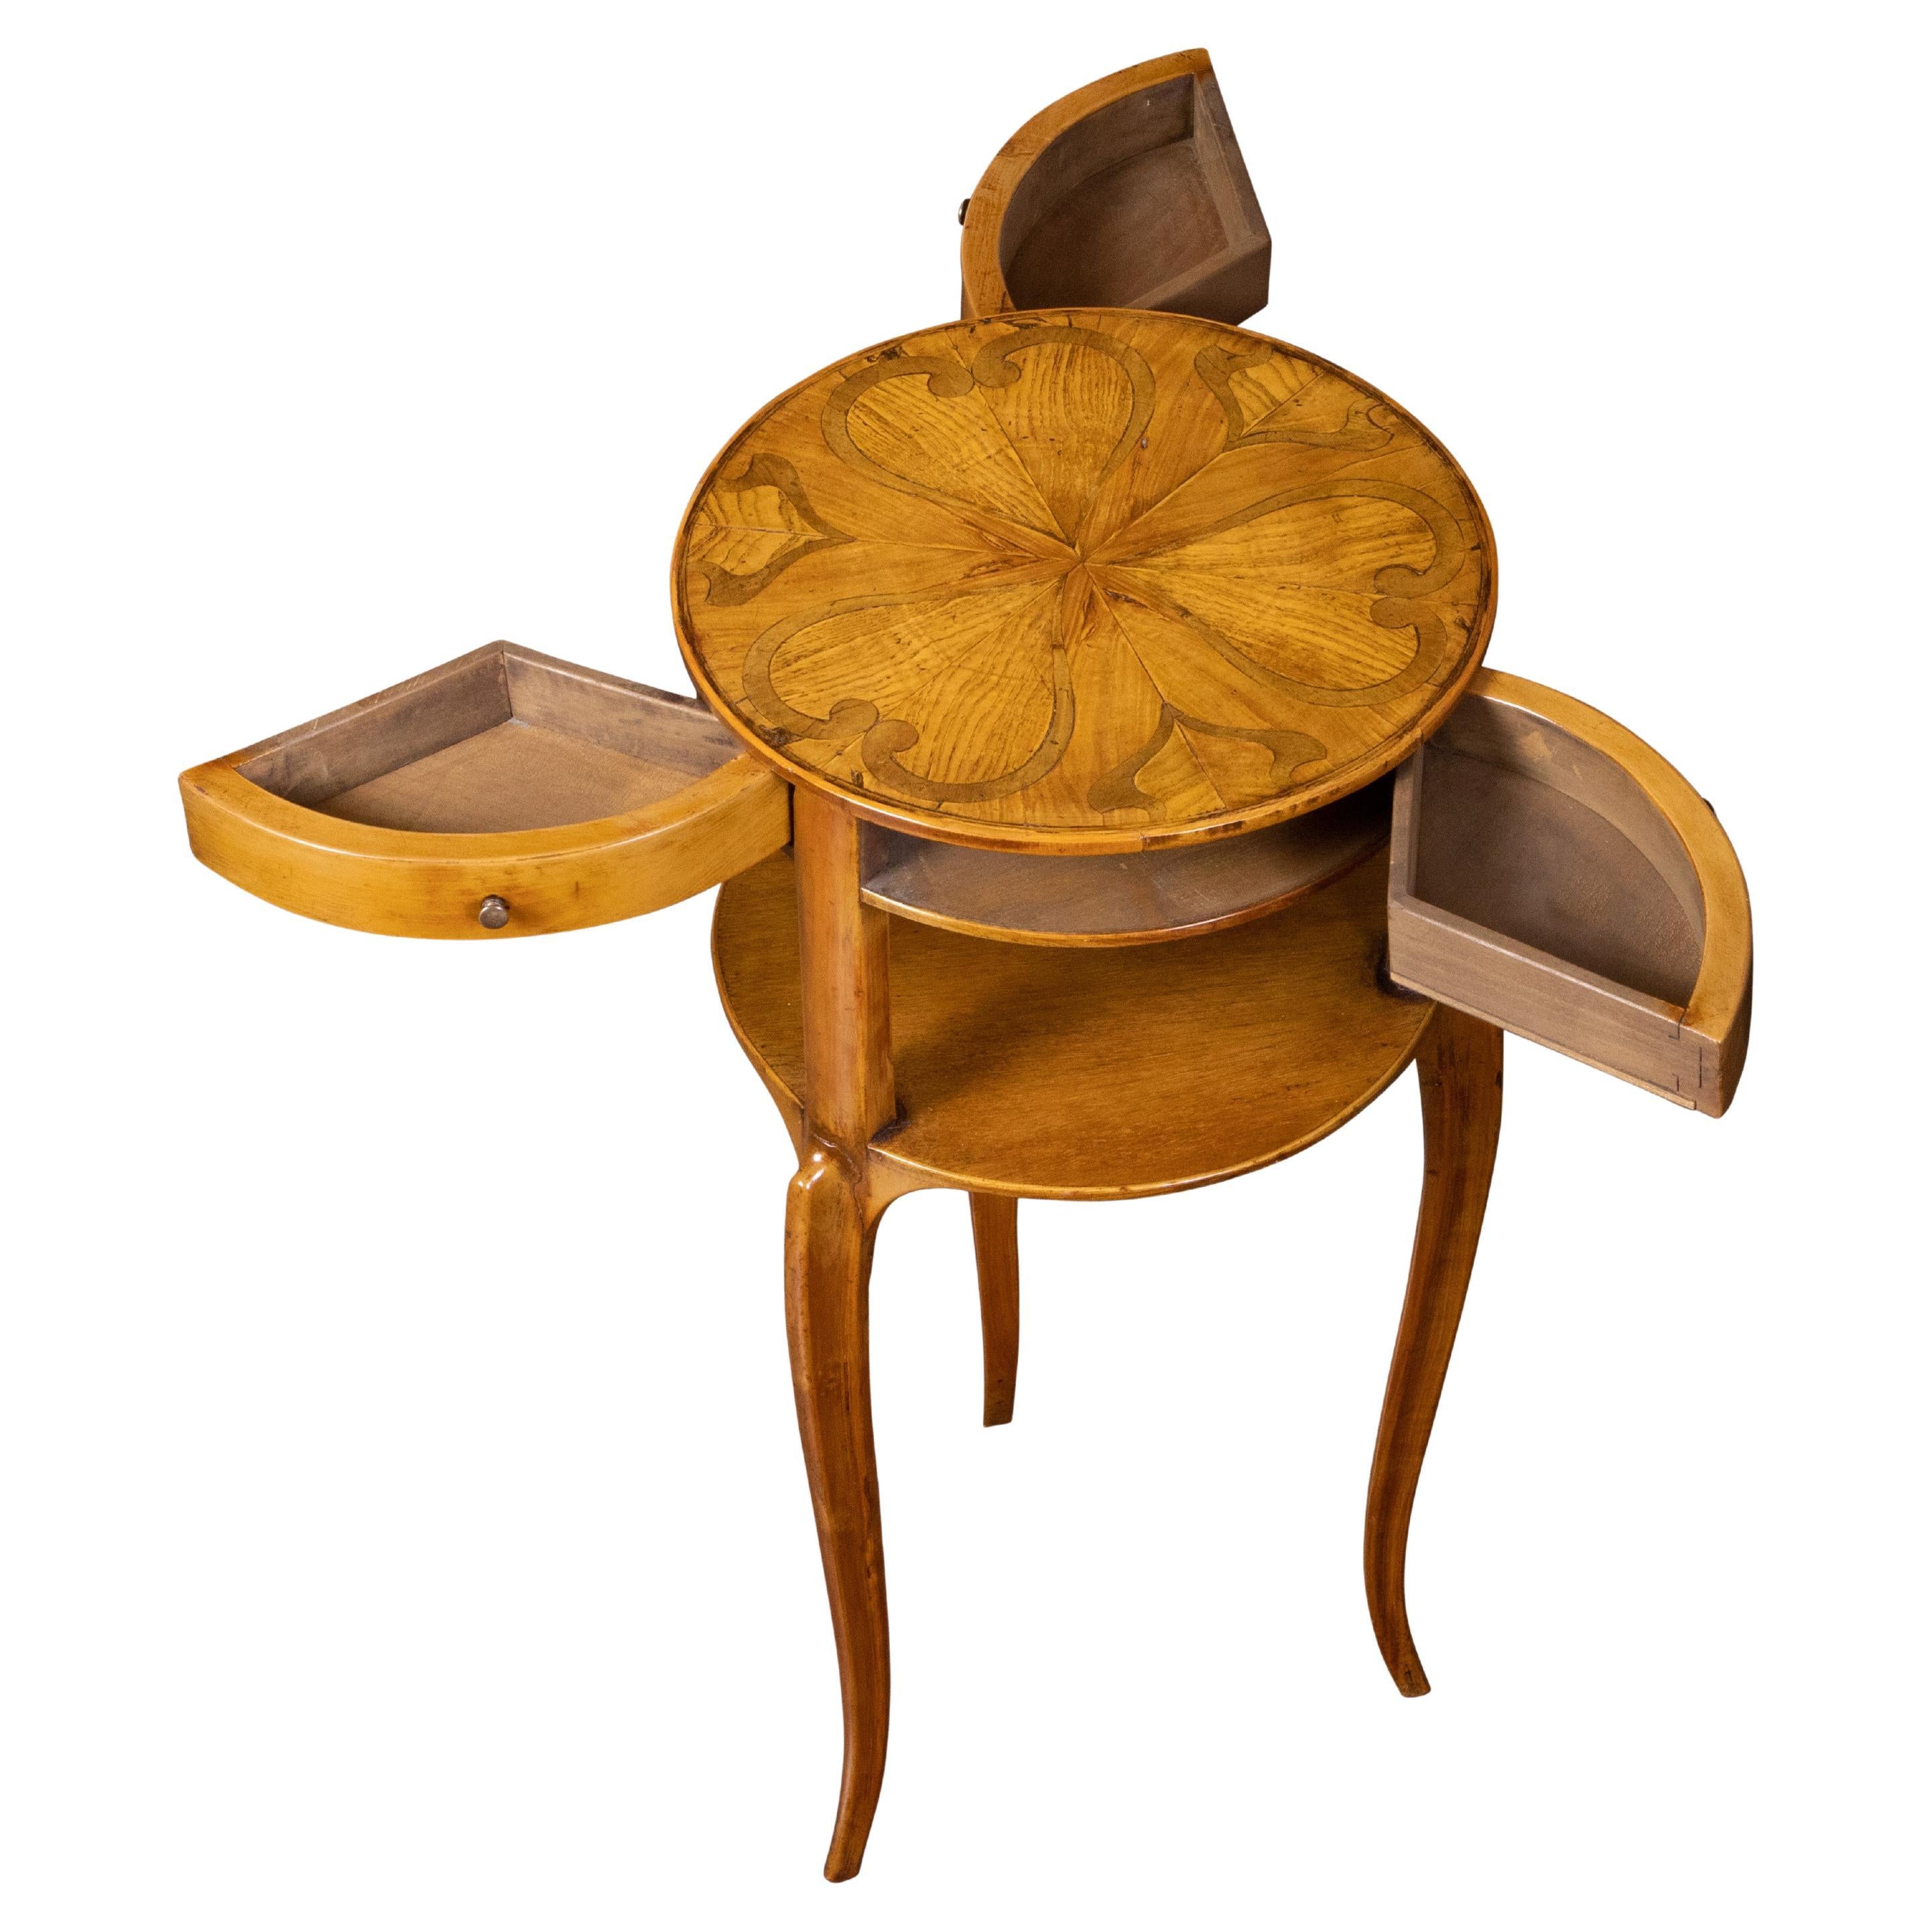 An Austrian Biedermeier style side table from the late 19th century, with marquetry top and sliding drawers. Created during the later years of the 19th century, this Biedermeier style table features a circular top with heart-shaped marquetry,